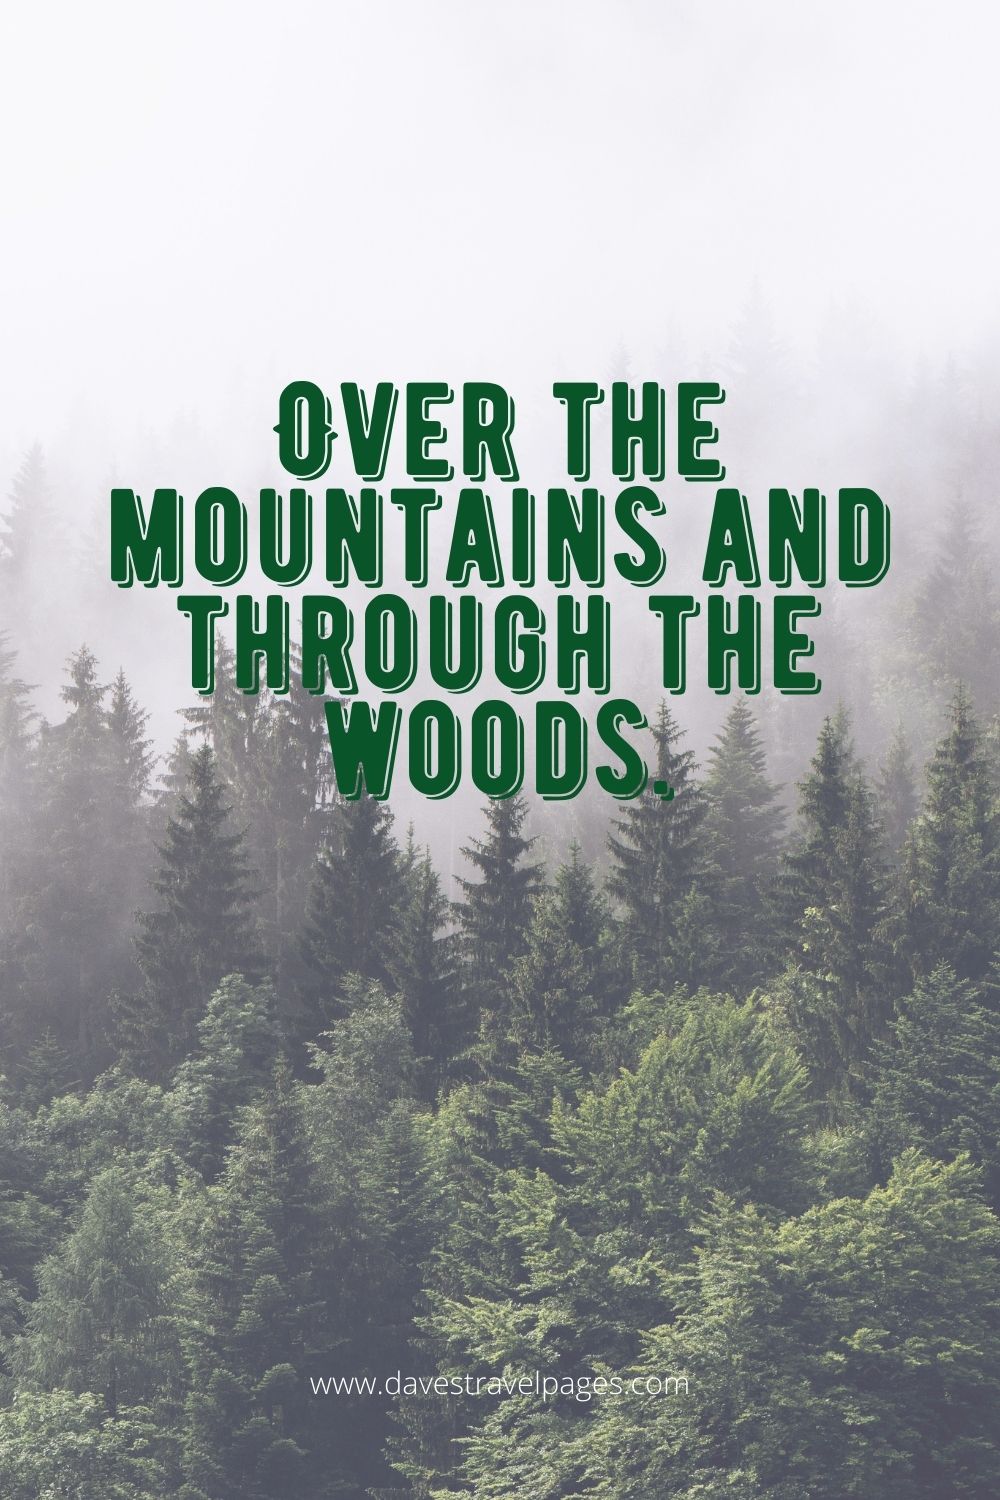 Over the mountains and through the woods captions